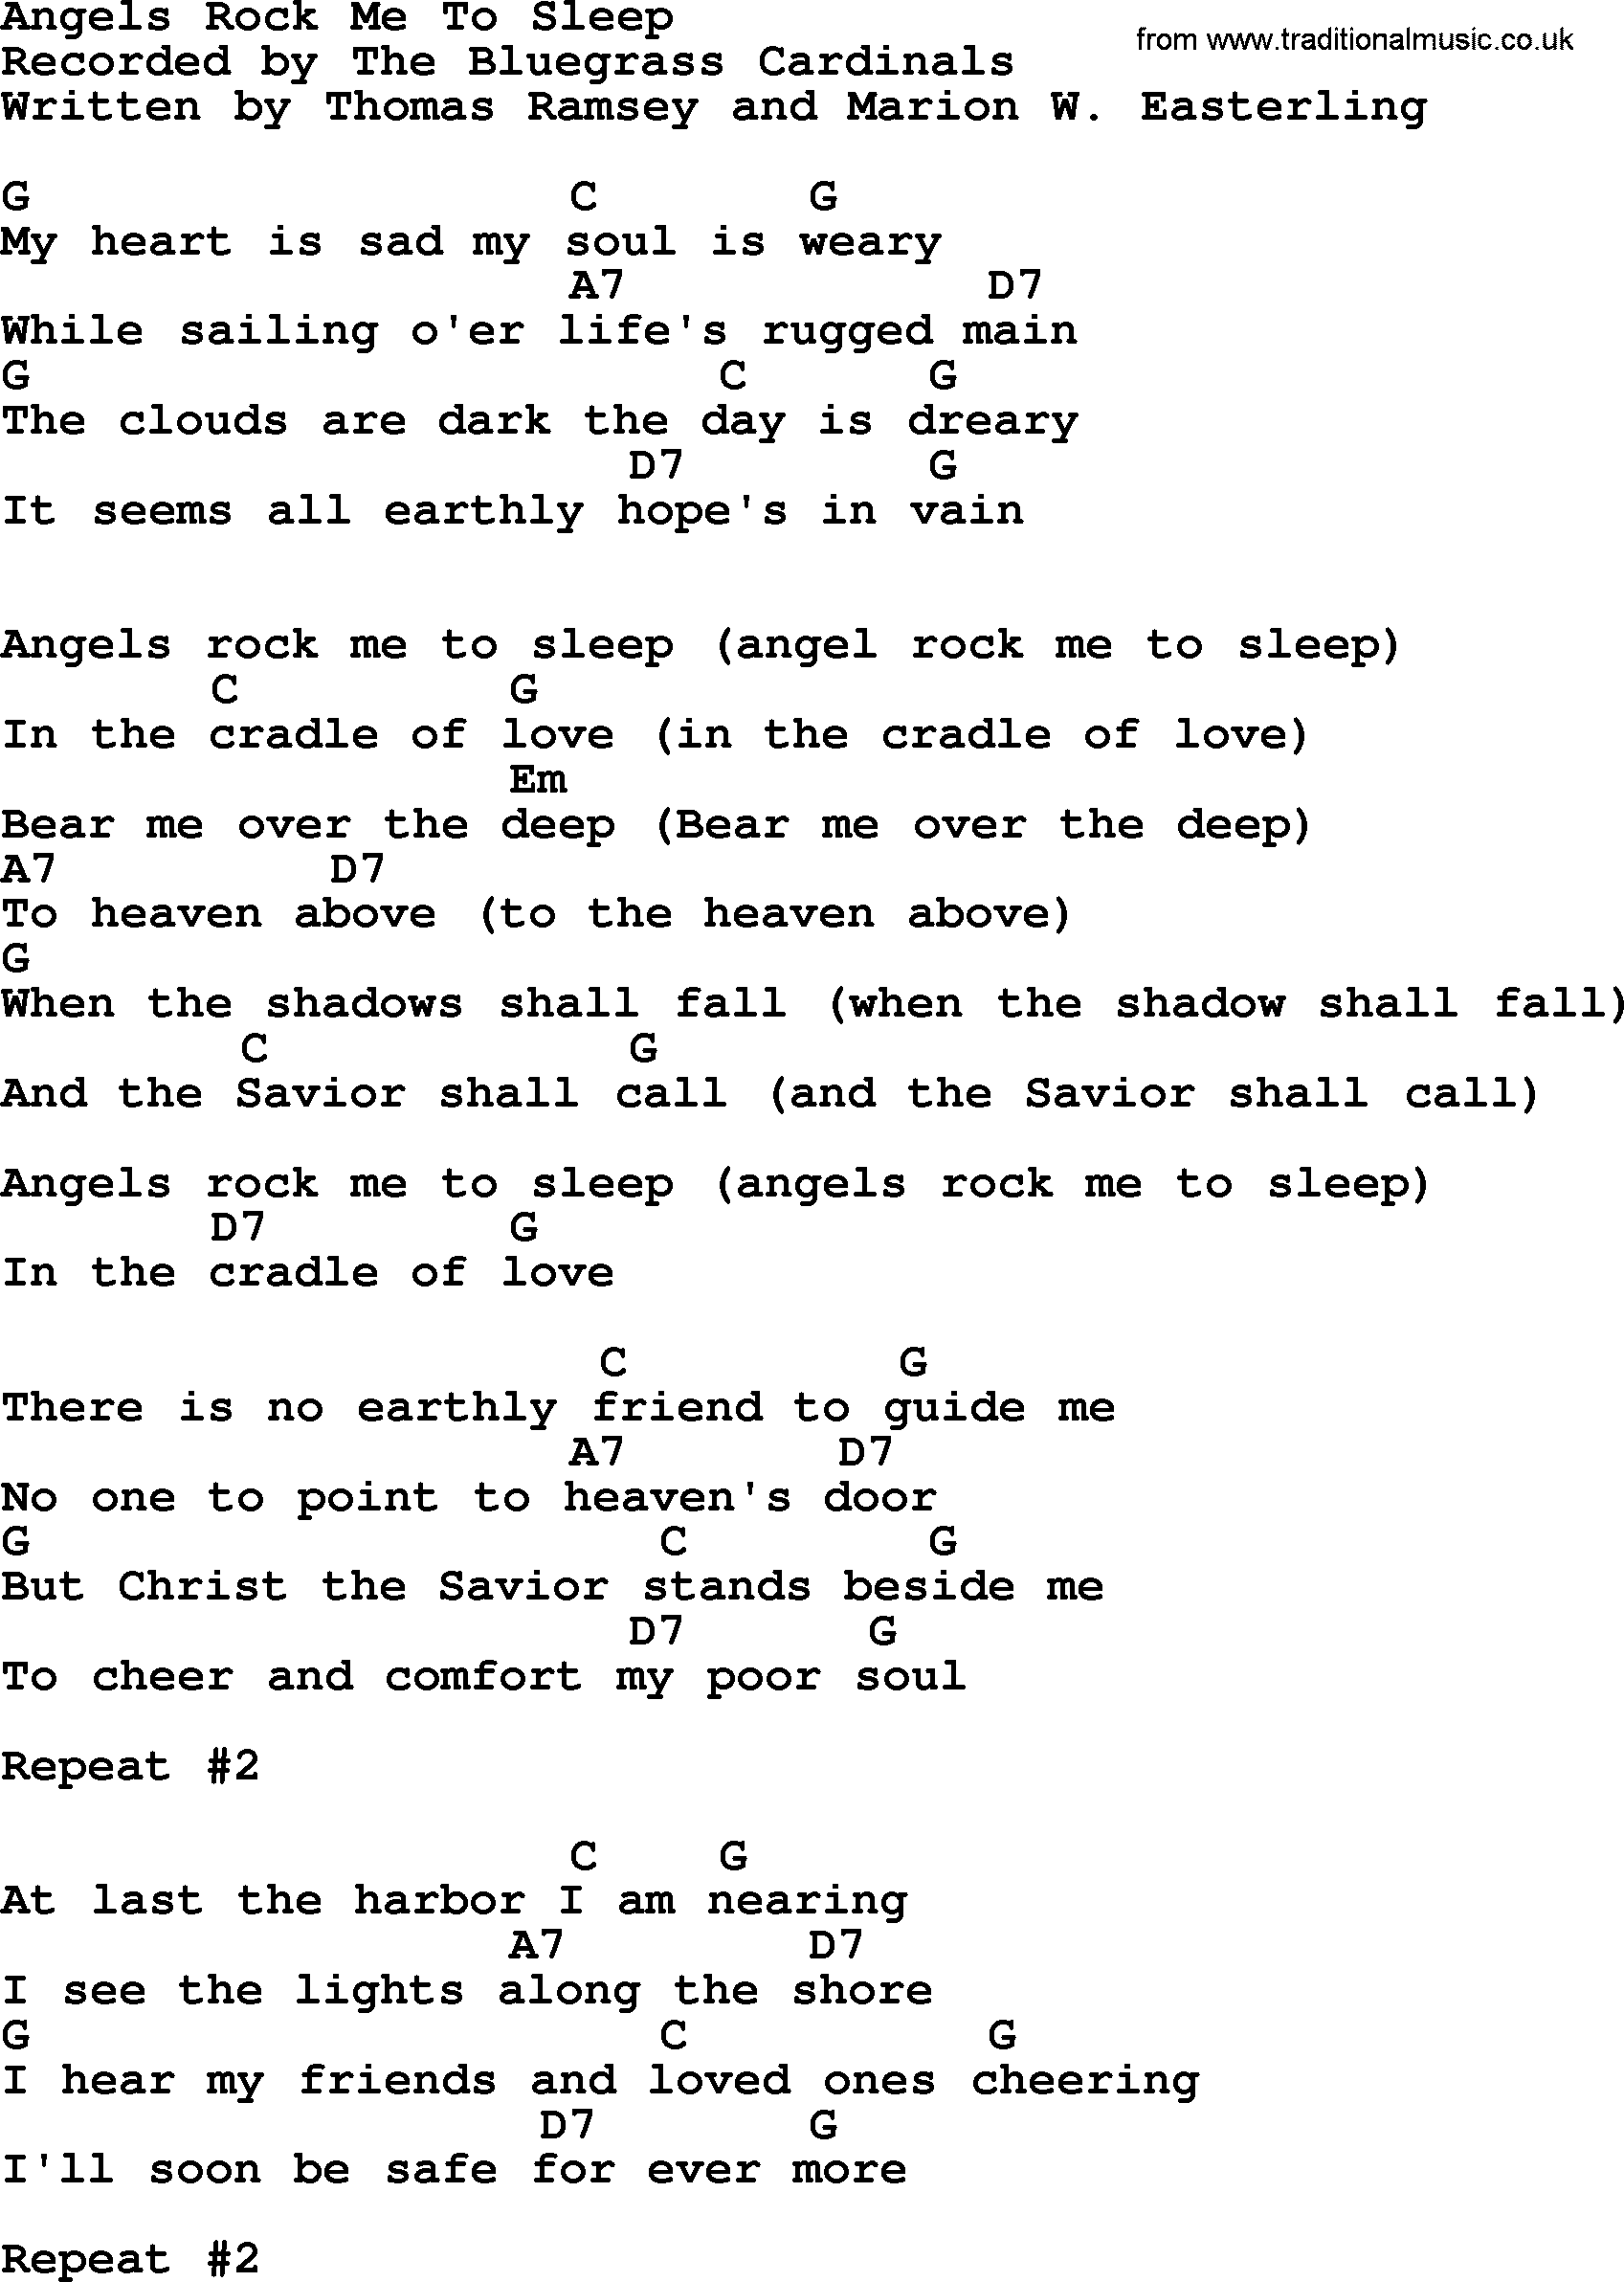 Bluegrass song: Angels Rock Me To Sleep, lyrics and chords